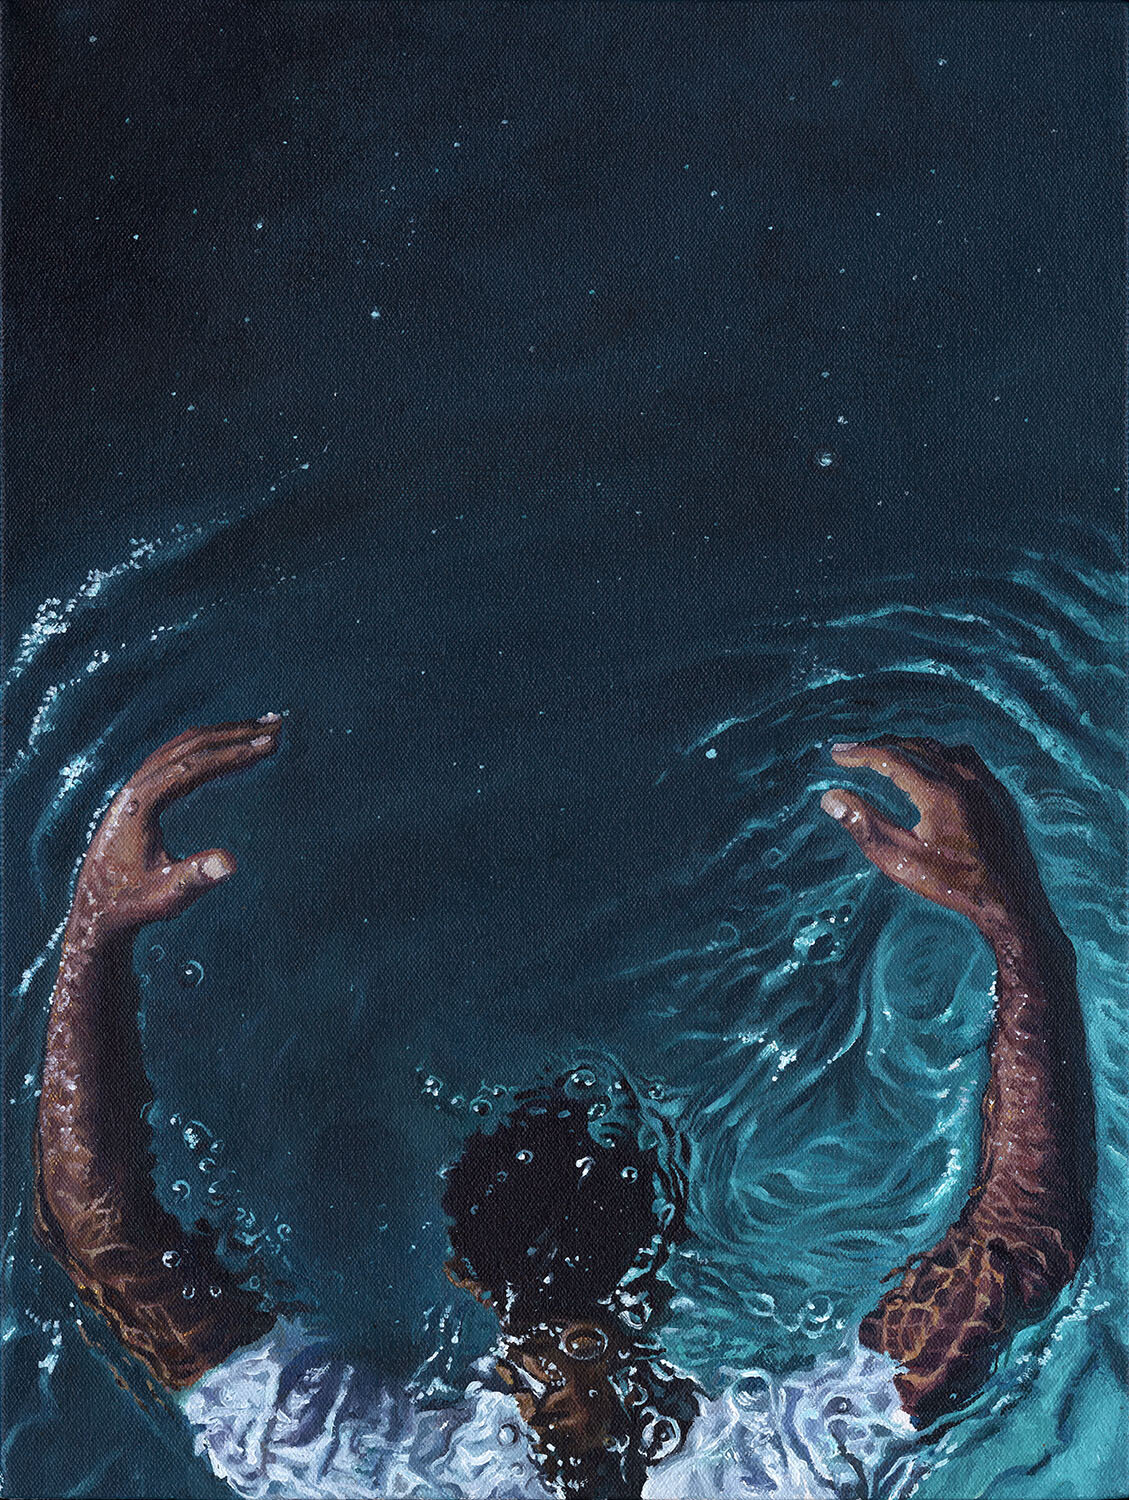 An illustrated image of a black man floating face down in water from the cover of the book The Water Dancer